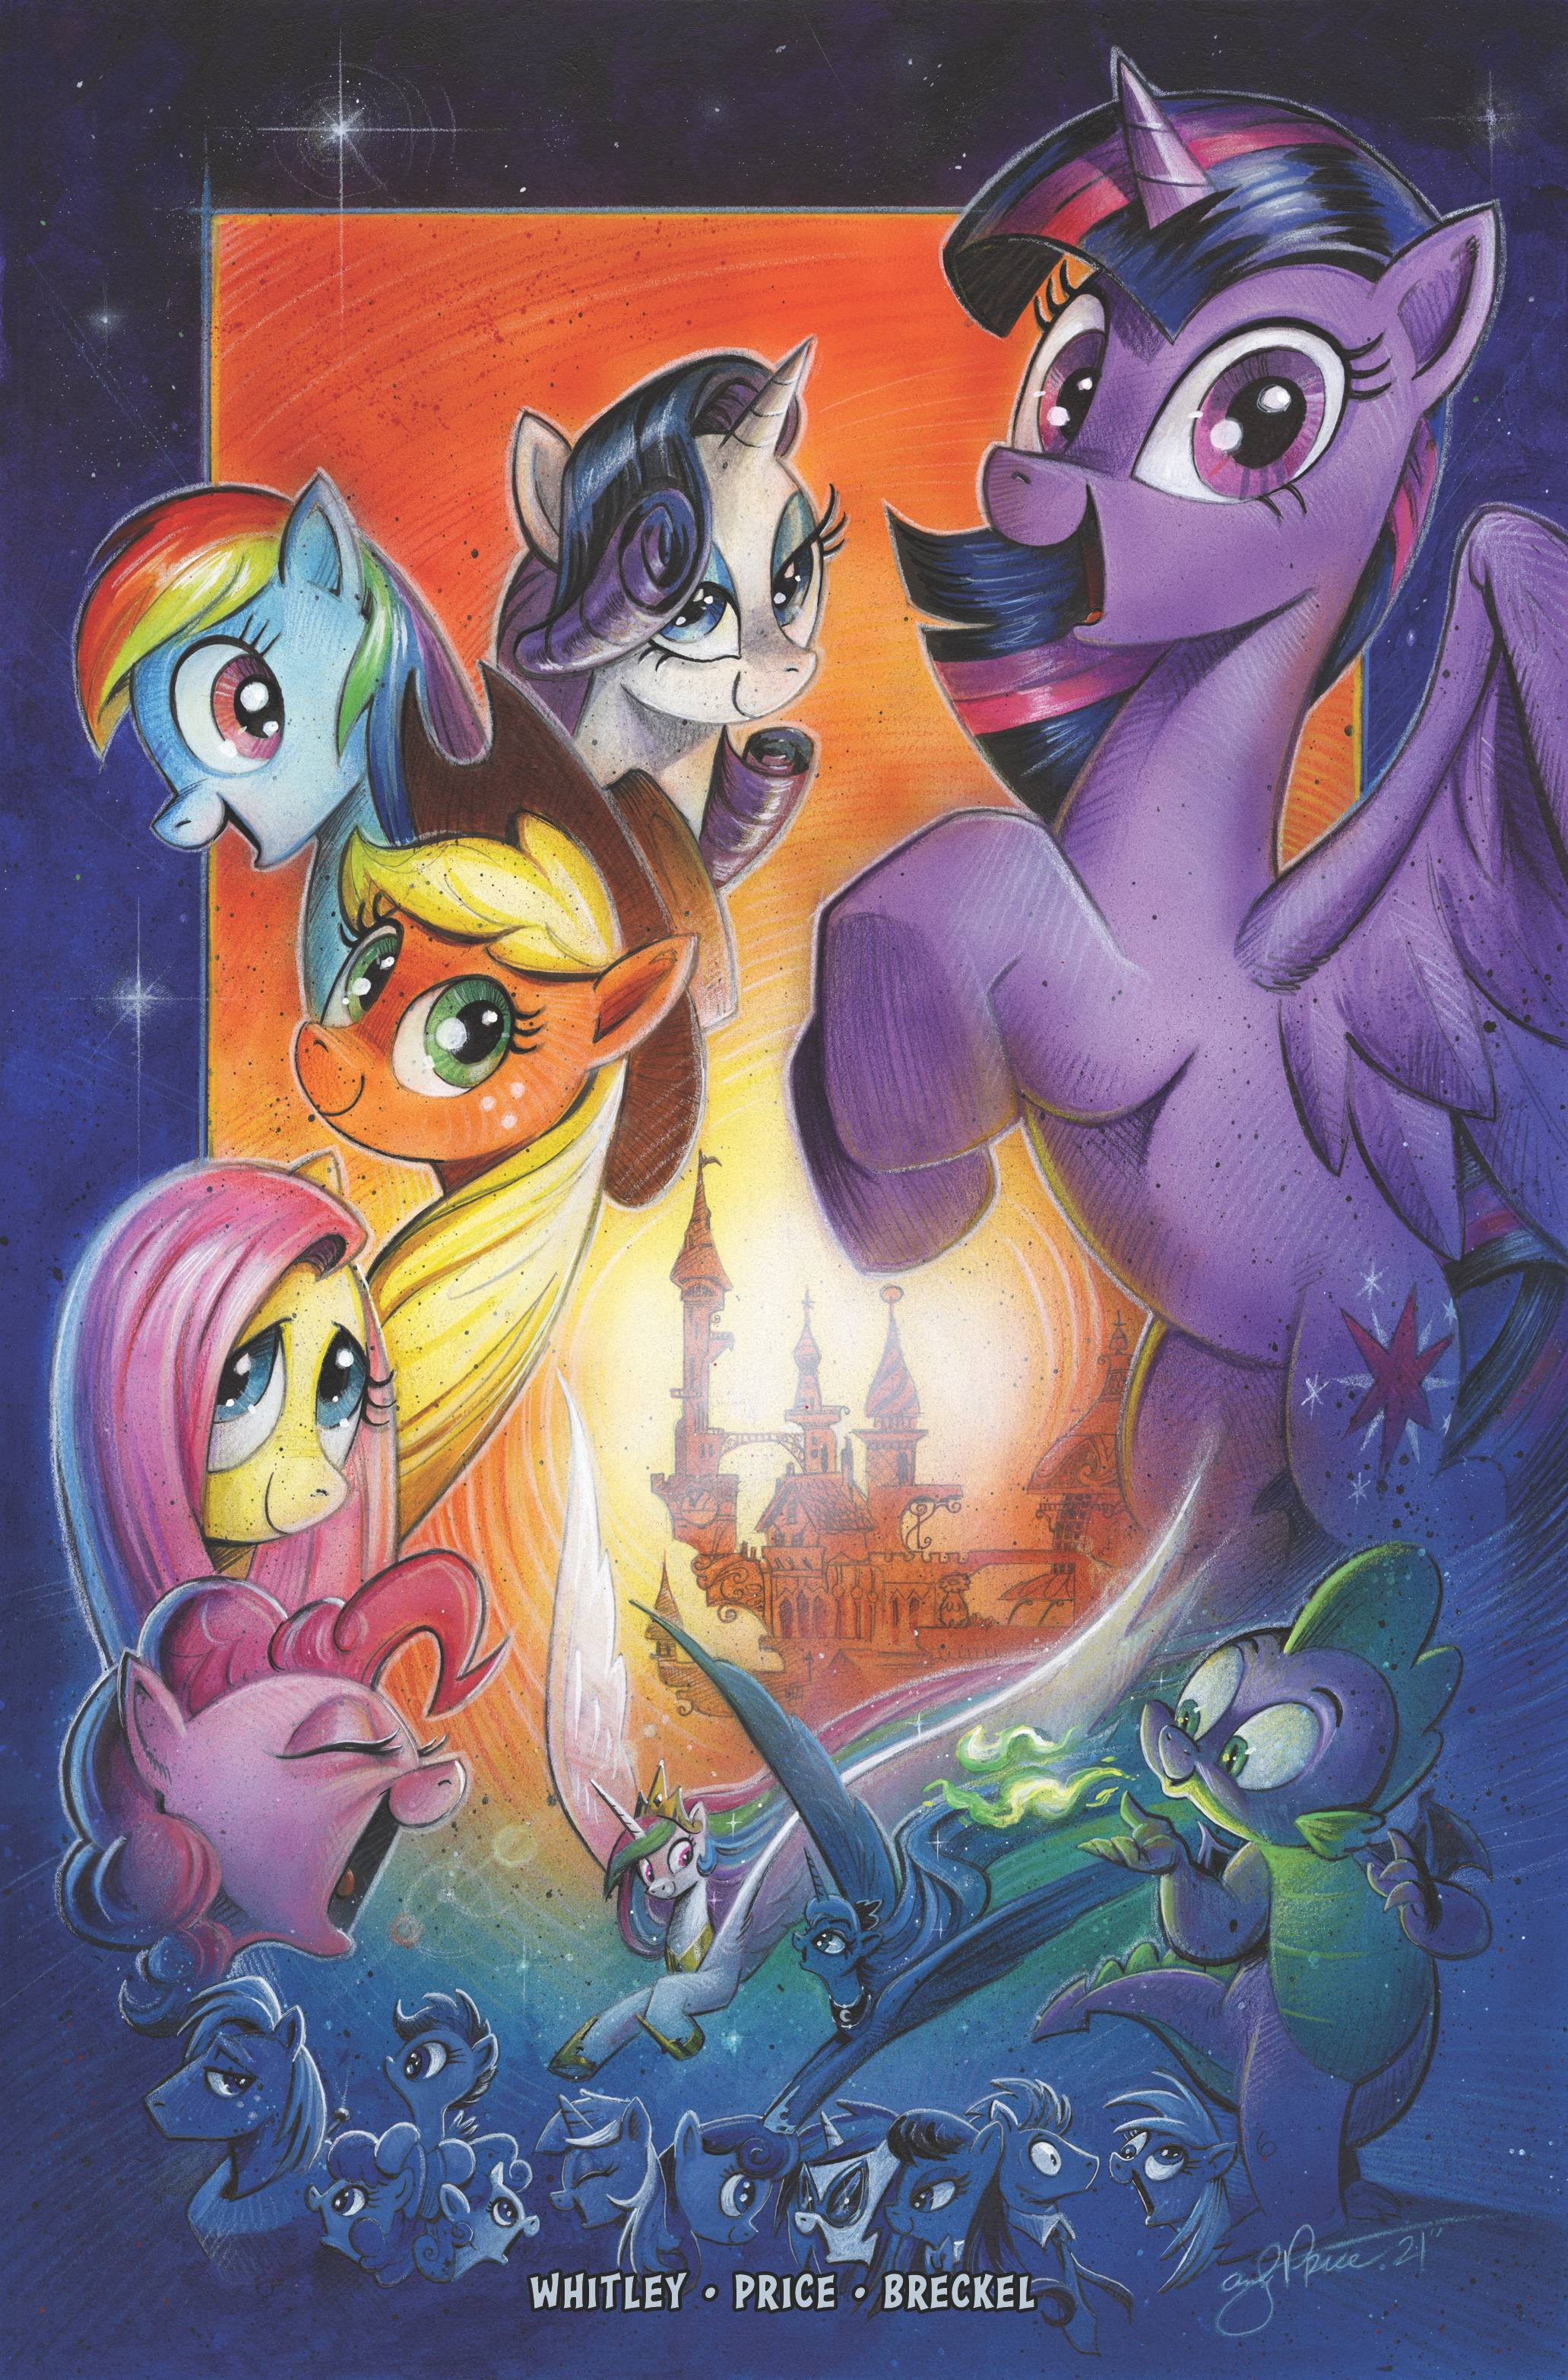 My Little Pony Friendship Is Magic #102 Cover A Price